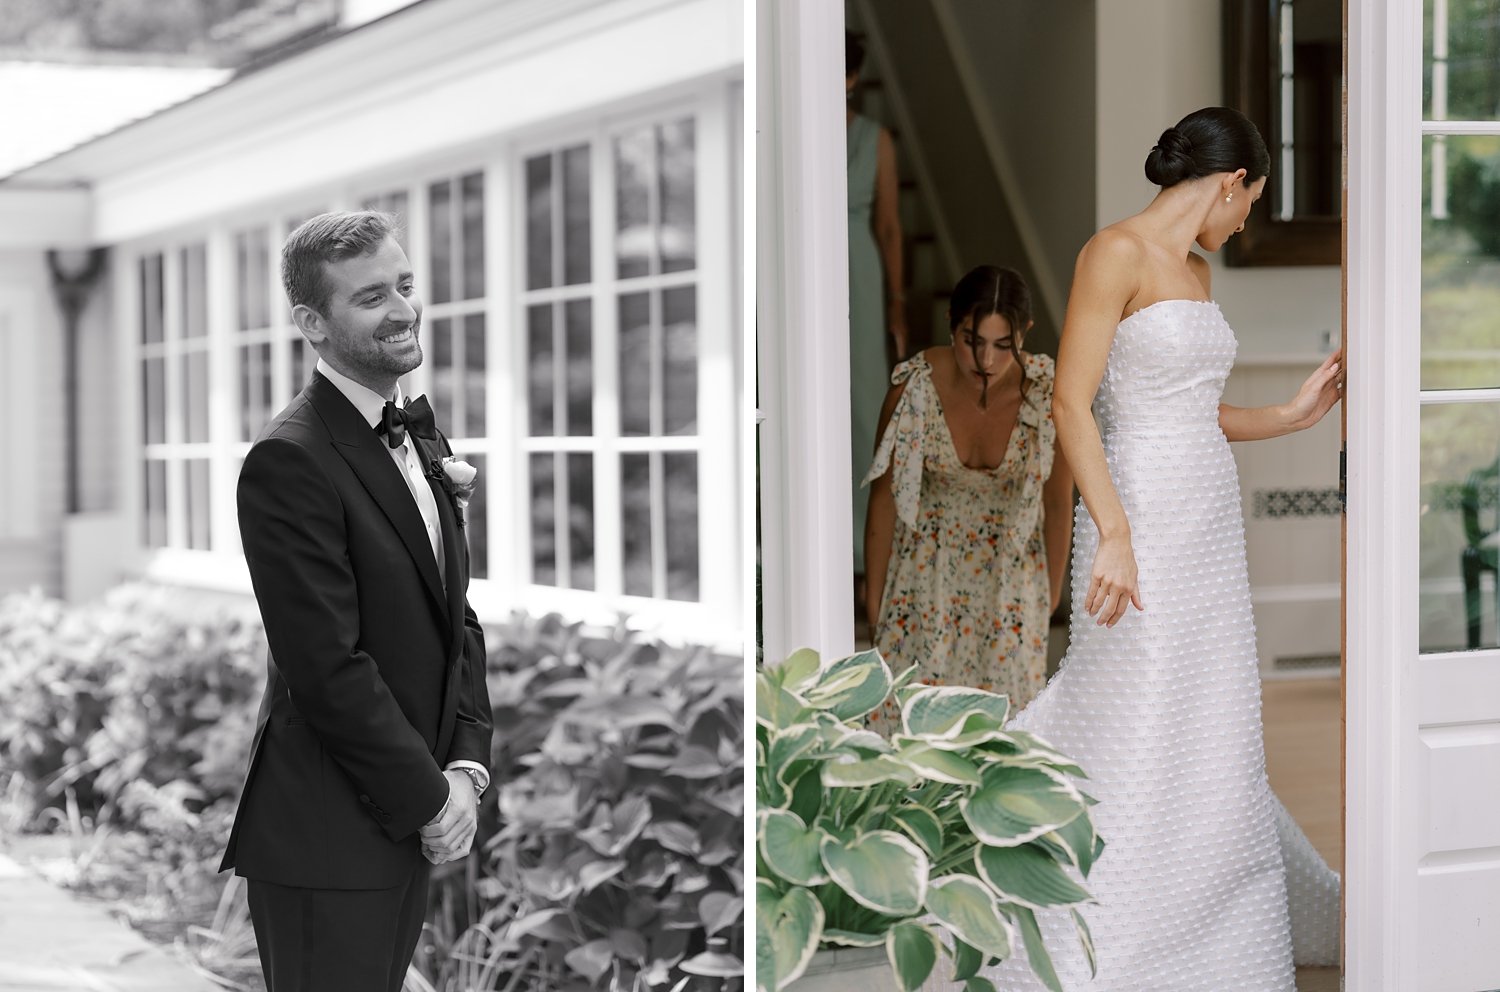 groom grins at bride as she walks out of doorway for first look